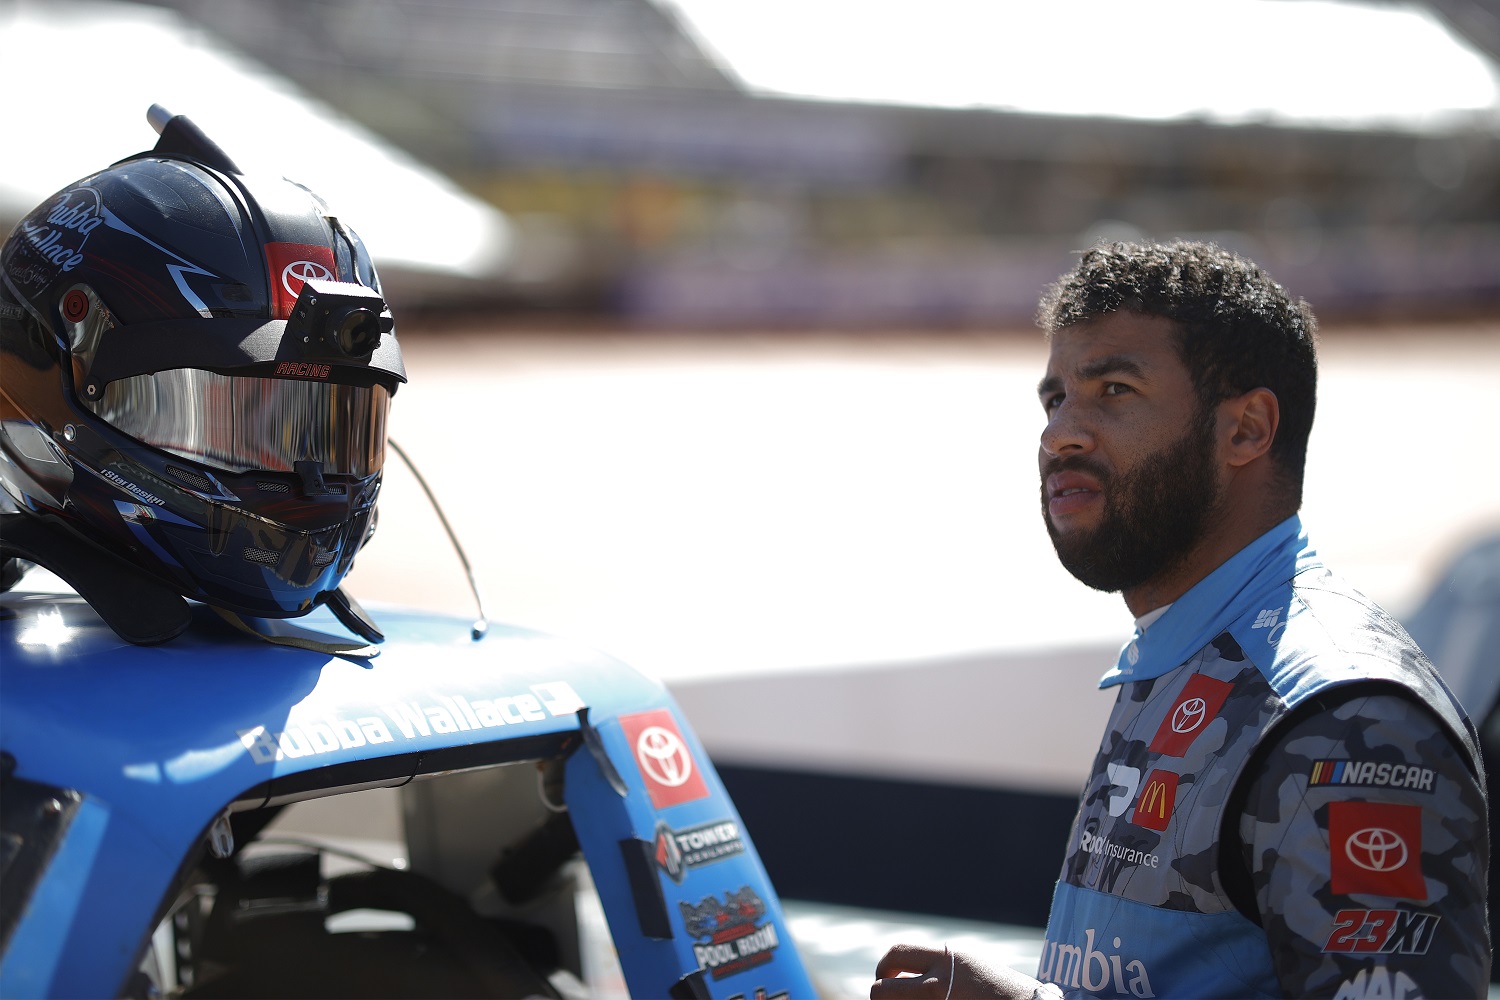 Bubba Wallace has not finished in the top 15 of a NASCAR Cup Series rave through seven events in the 2021 schedule.